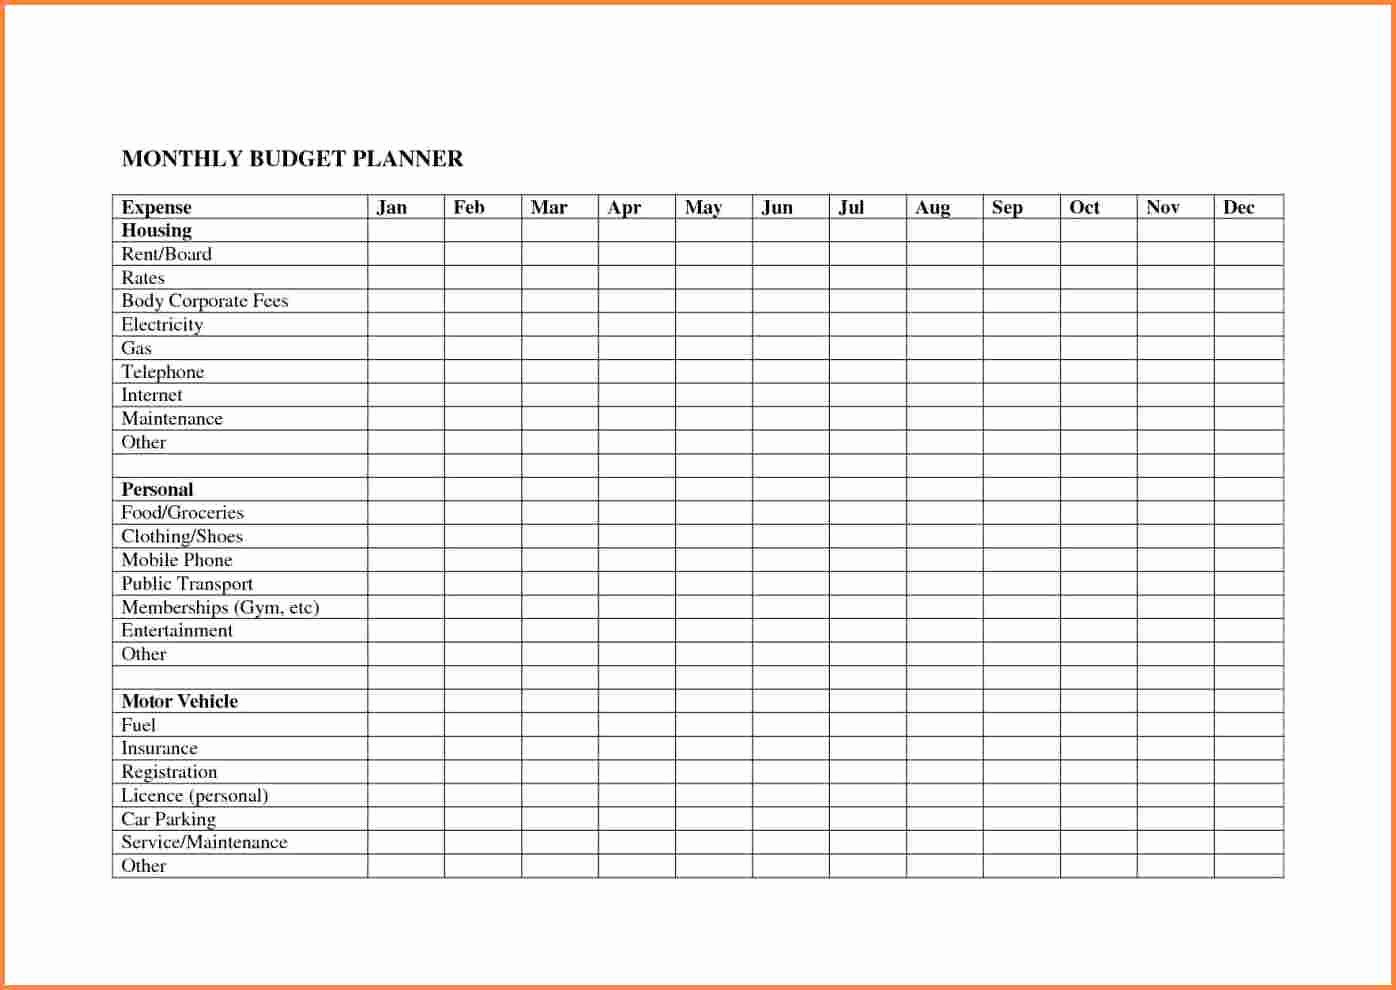 Monthly Budget Excel Spreadsheet Template New 10 Monthly Bud Planner Spreadsheet